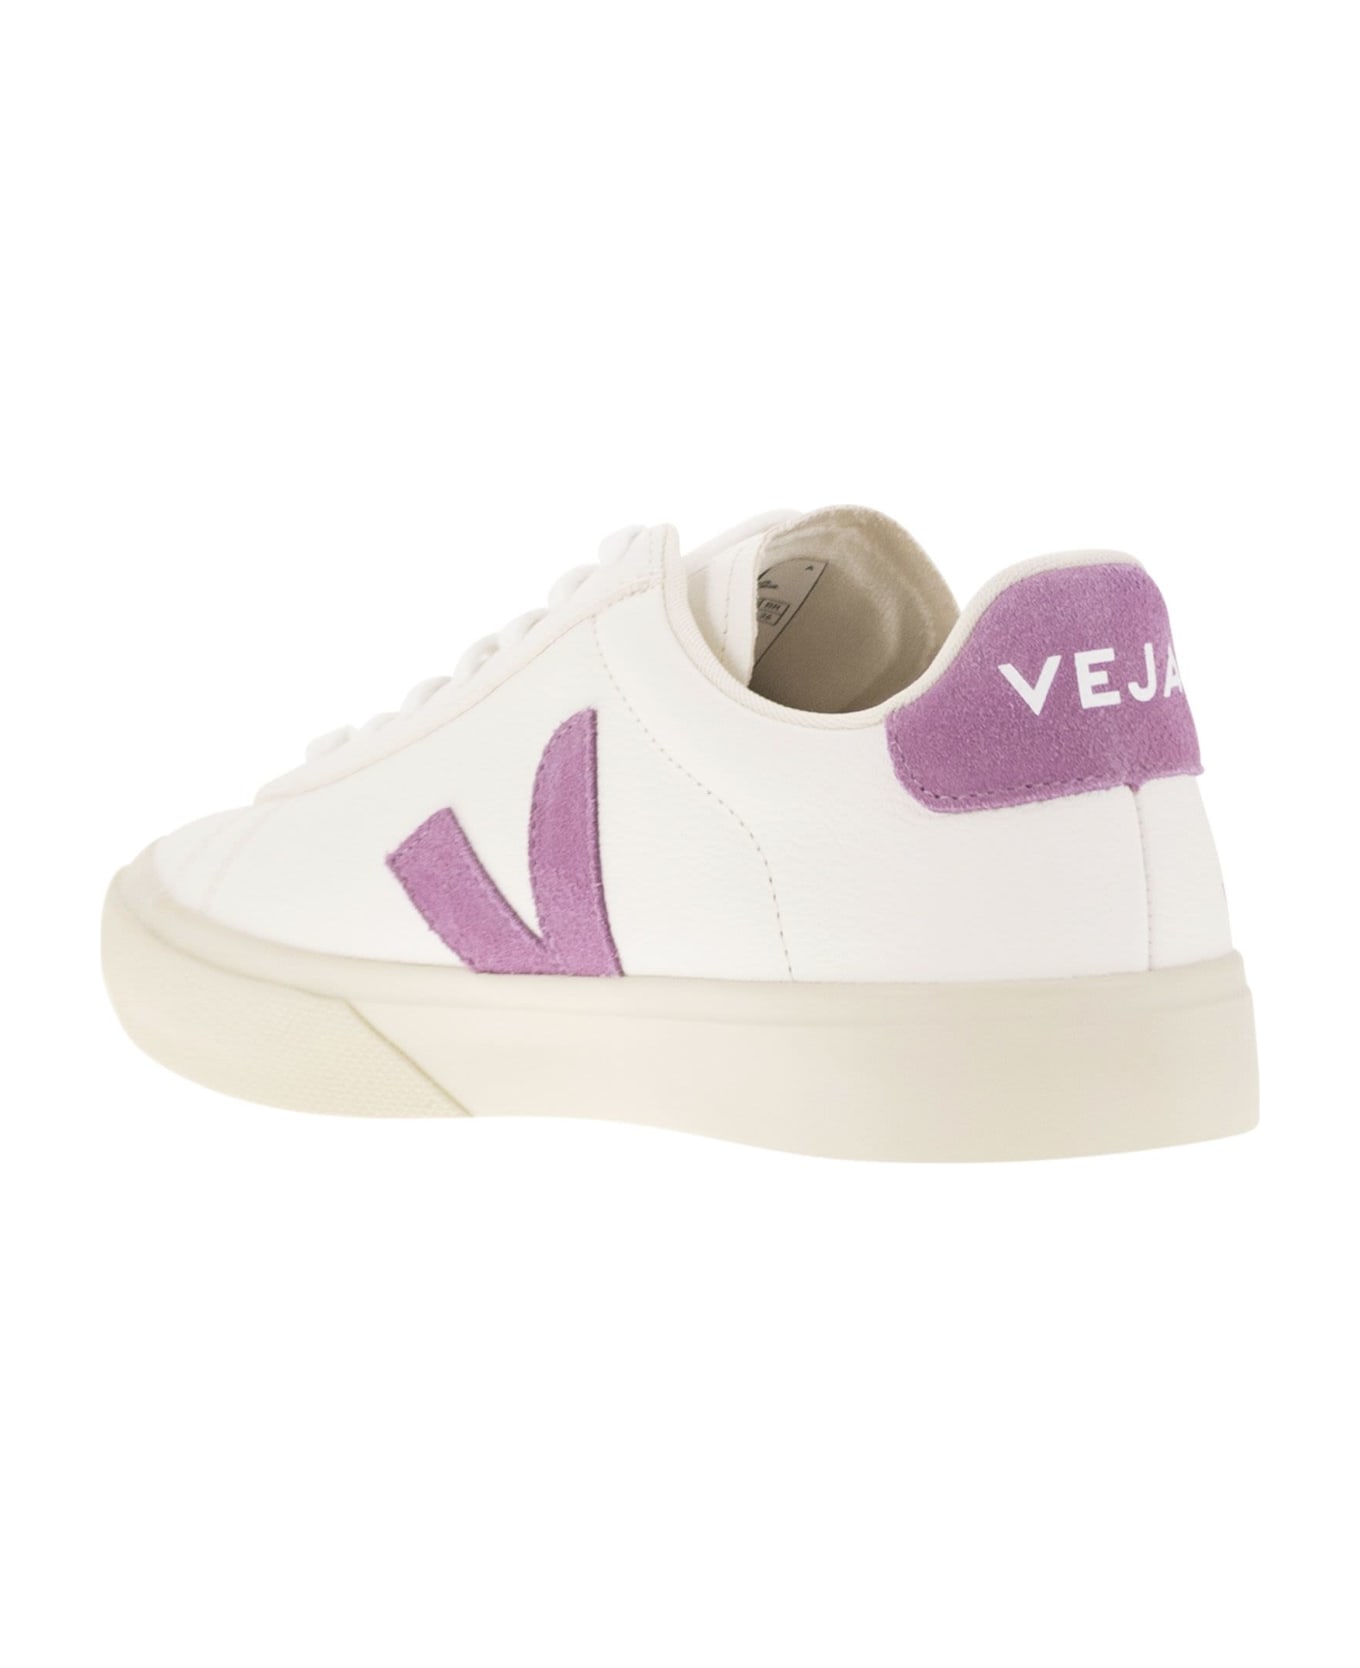 Veja Chromefree Leather Trainers - White/pink スニーカー